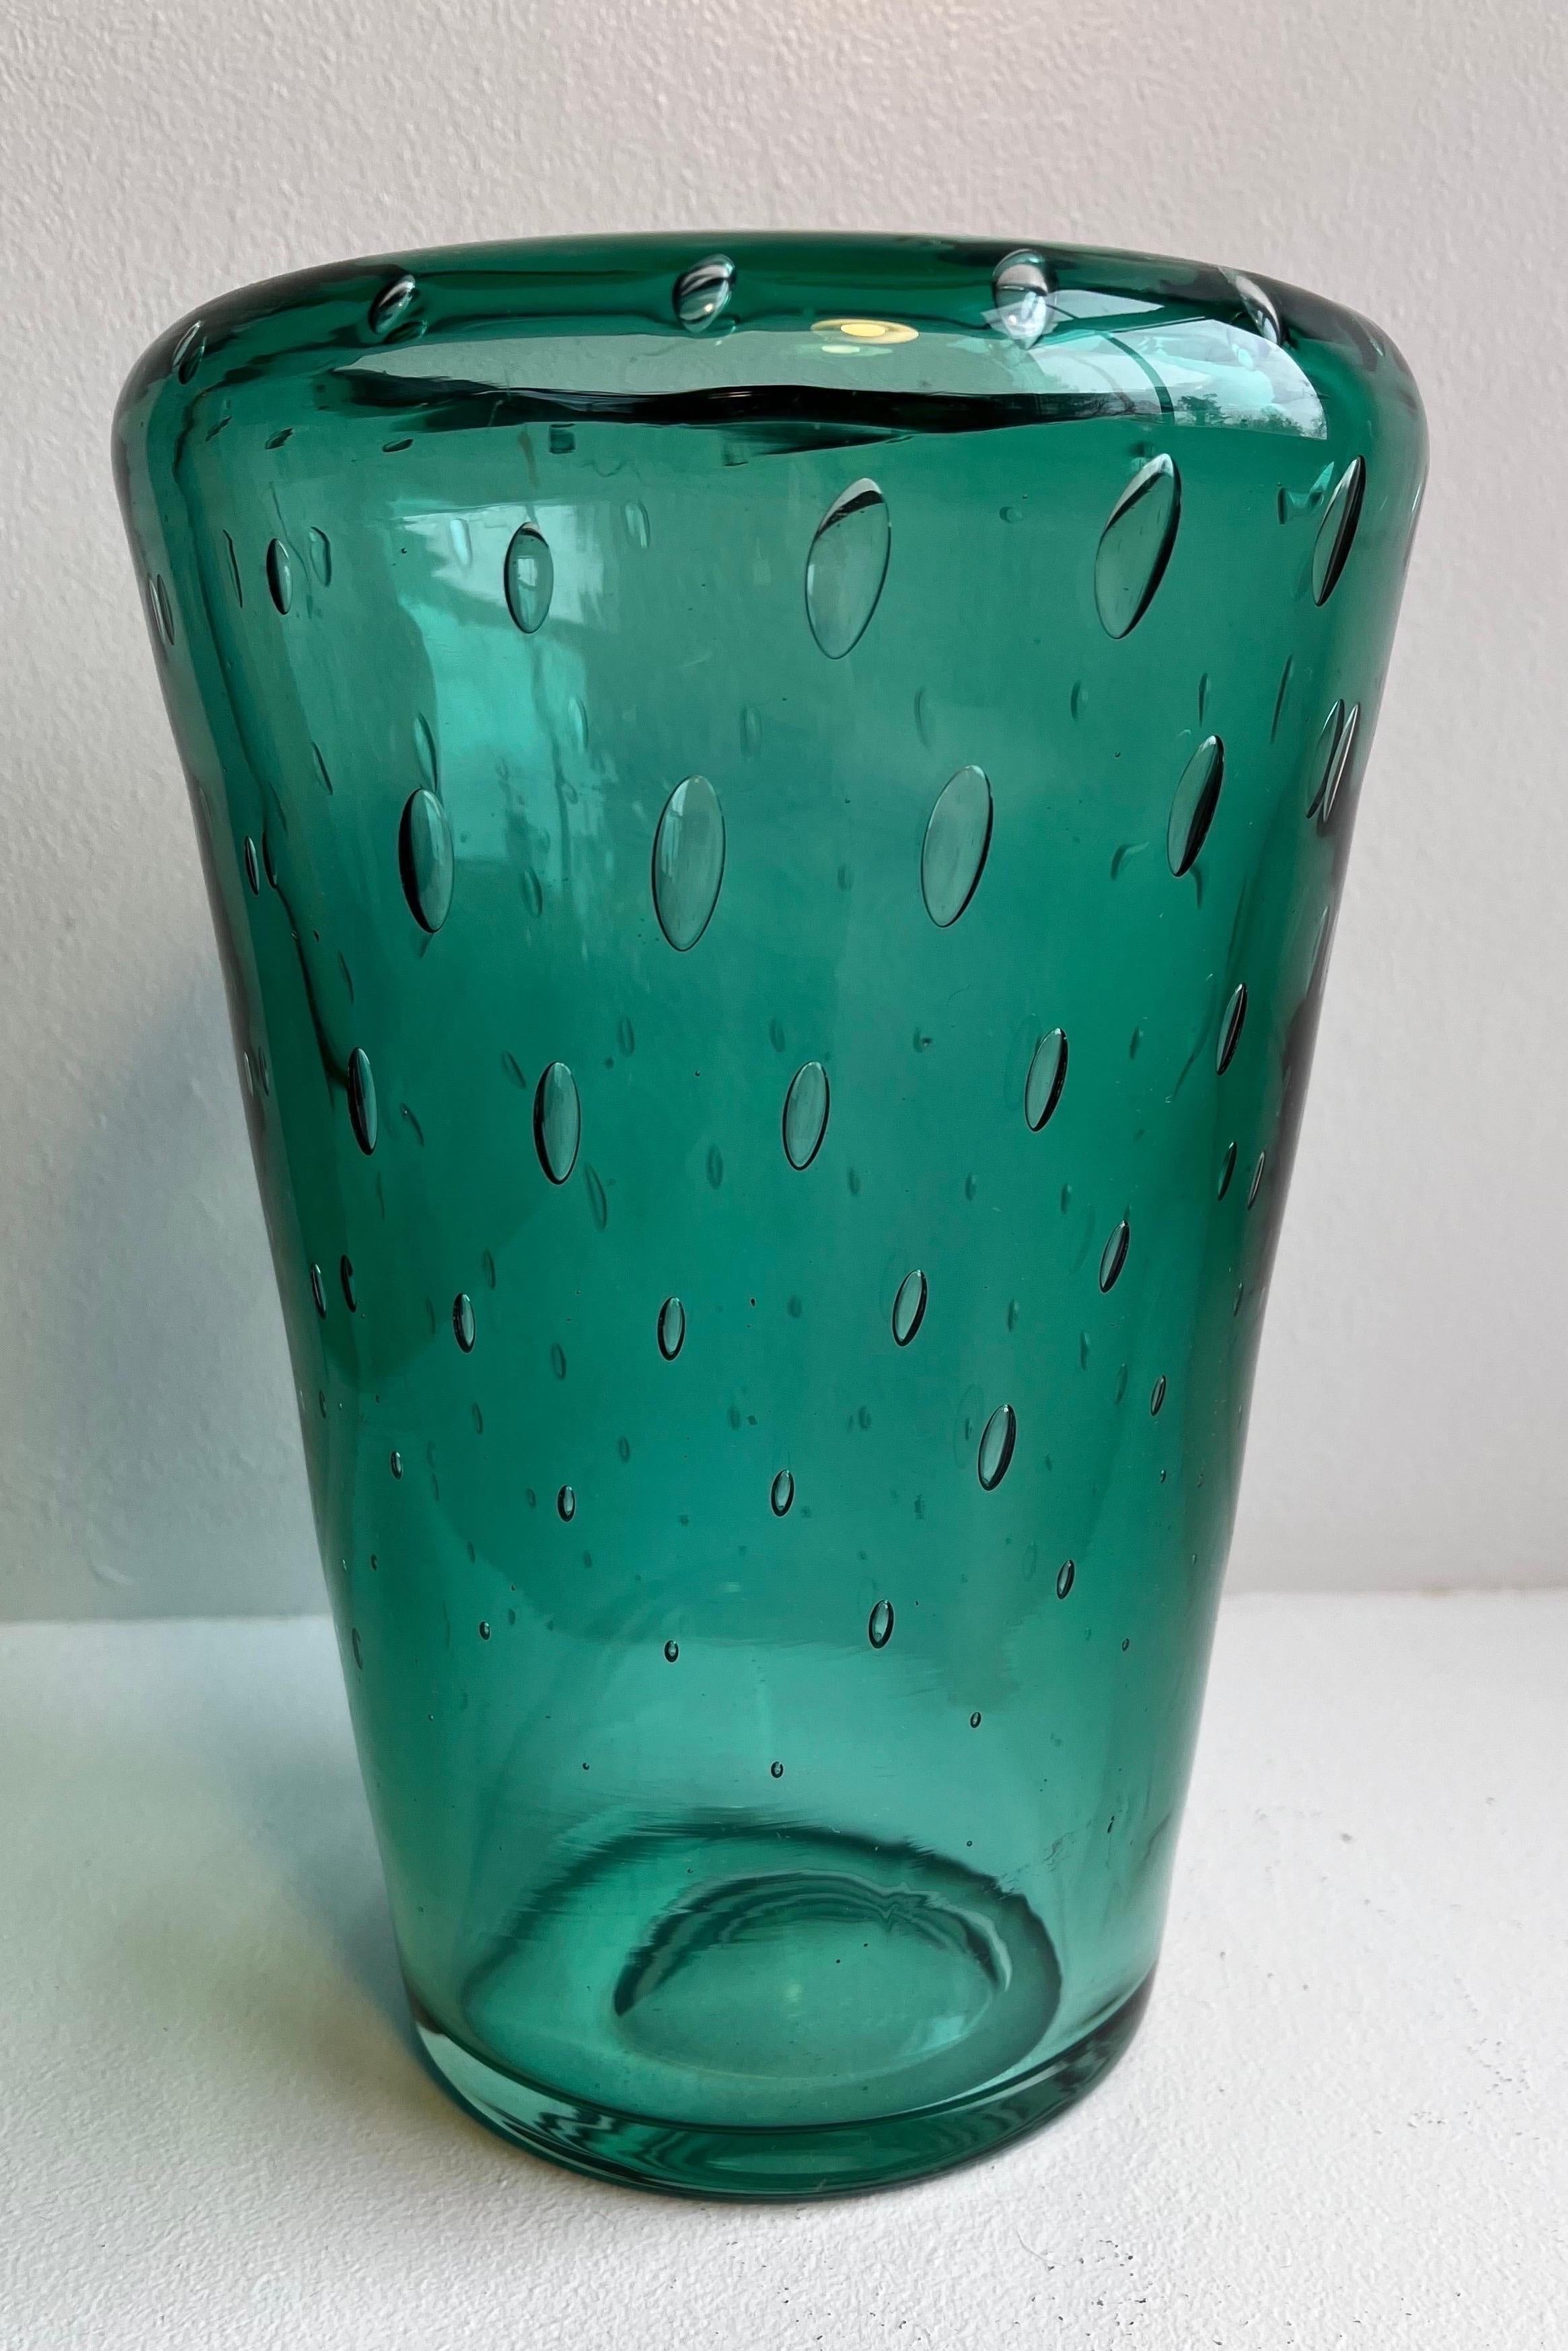 Green Blenko Vase with Air Bubbles. 
circa 1950s. 
Great green color.
 